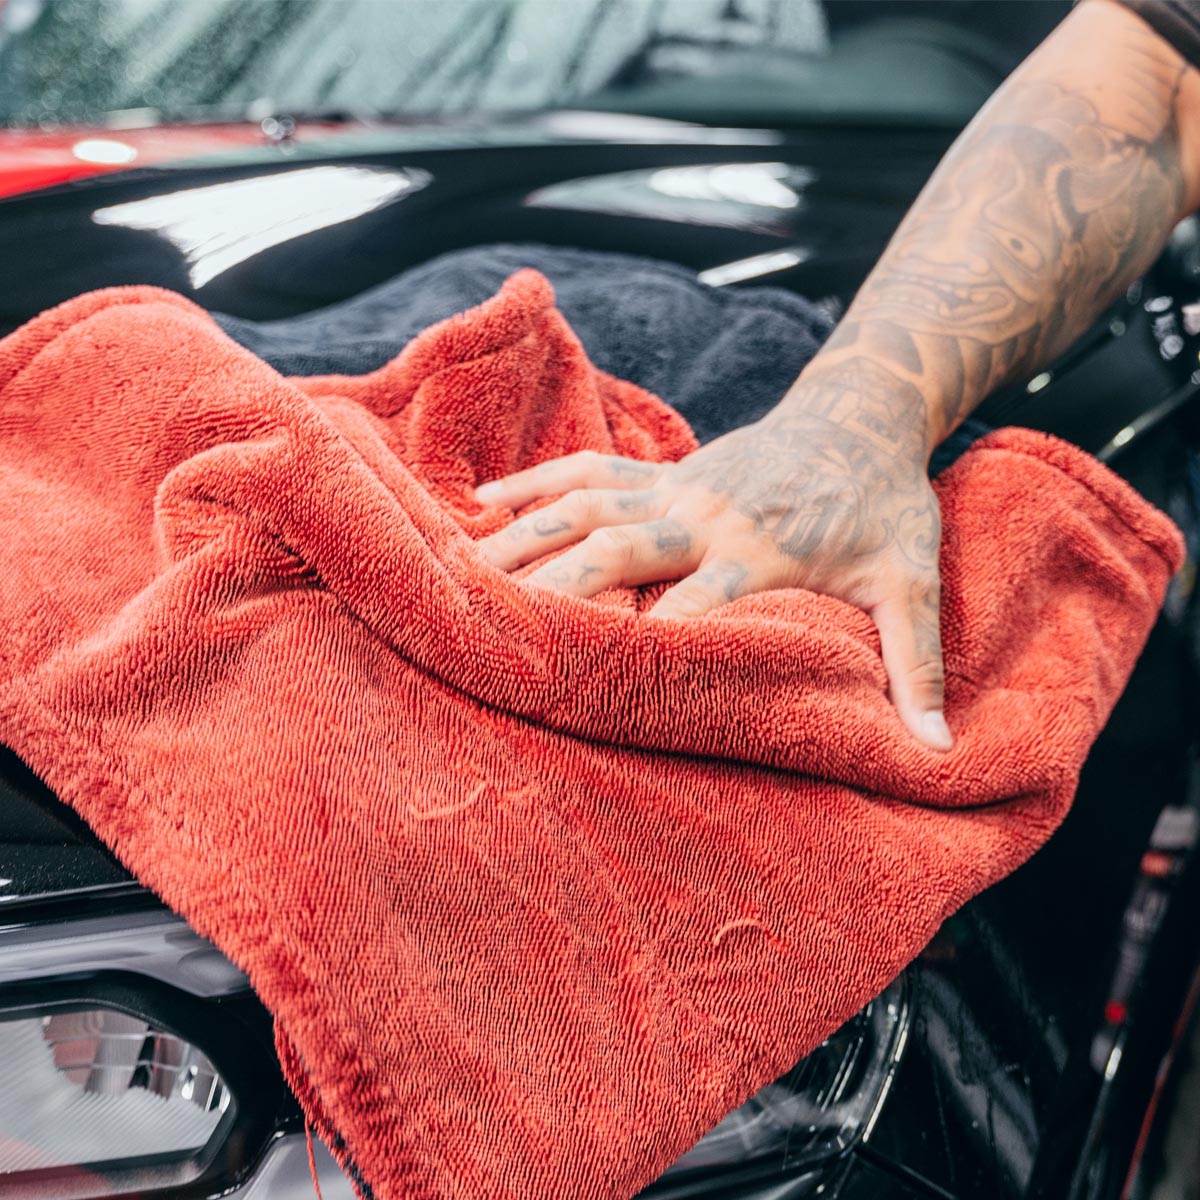 [Dreadnought] Best Microfiber Towels For Cars (1PK)